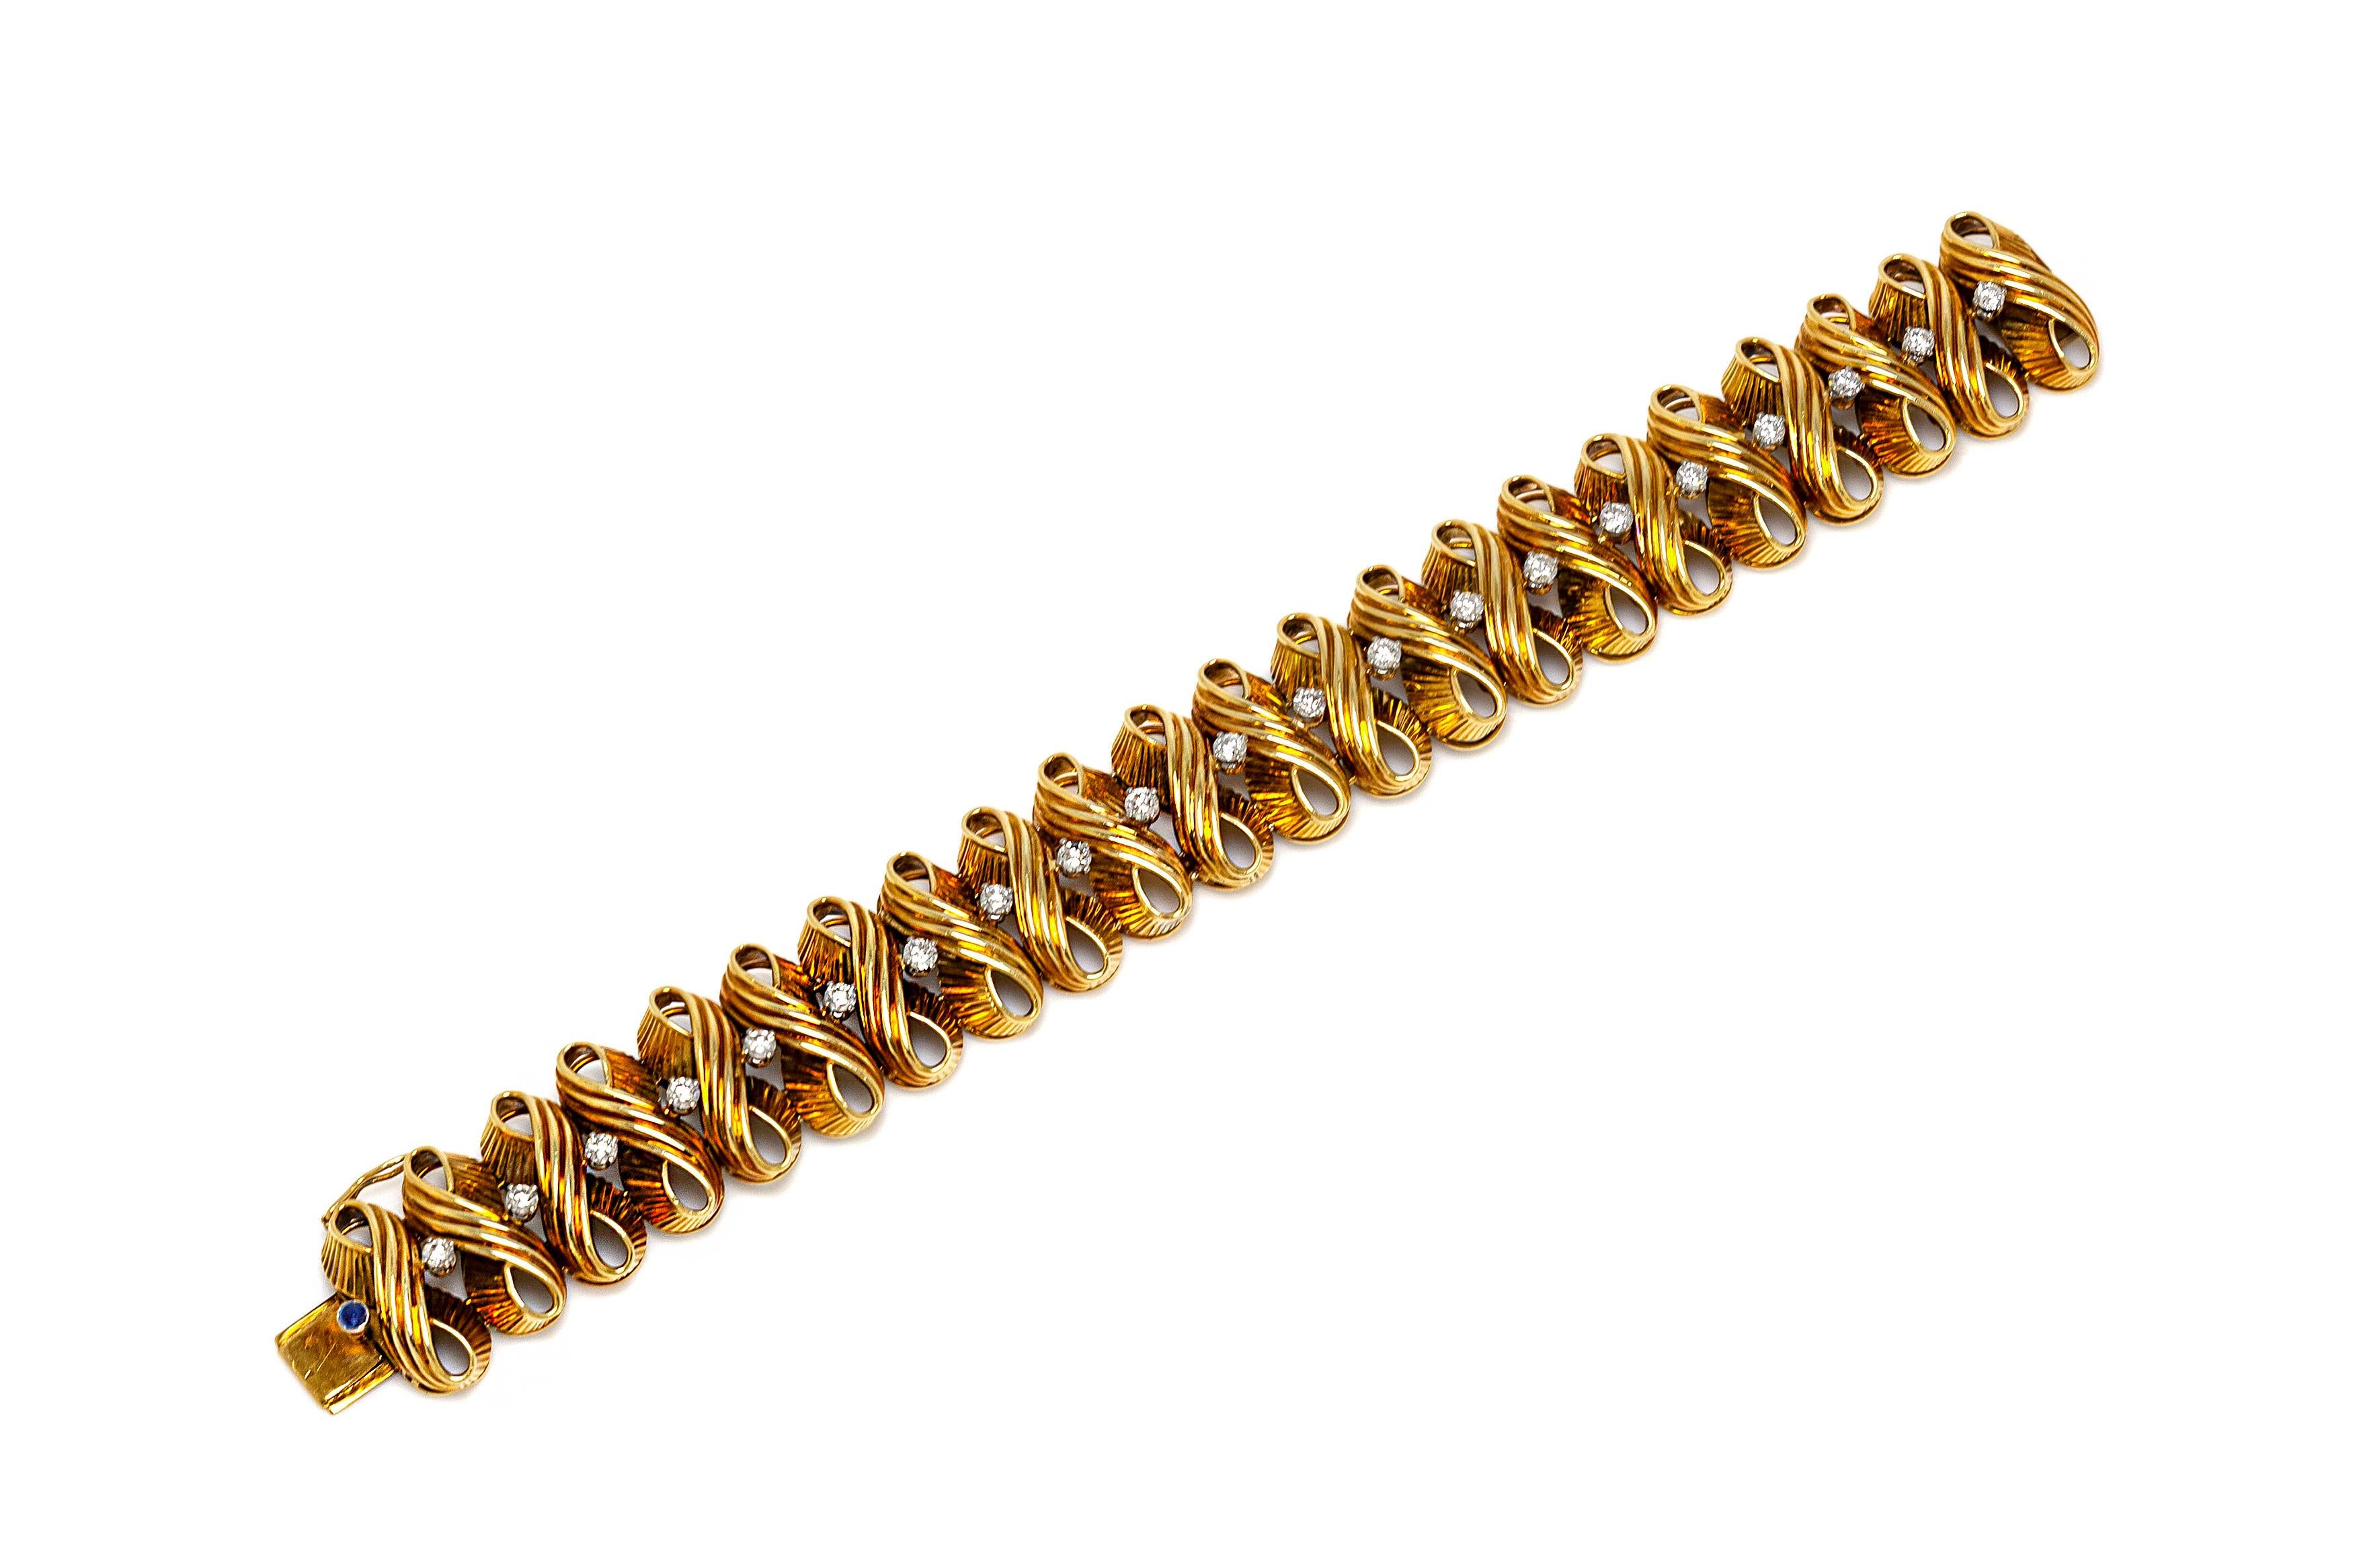 Bracelet finely crafted in 18k yellow gold with diamond weighing a total of 2.50 carat. Length of the bracelet is 20 cm/8 inch. Circa 1960's.